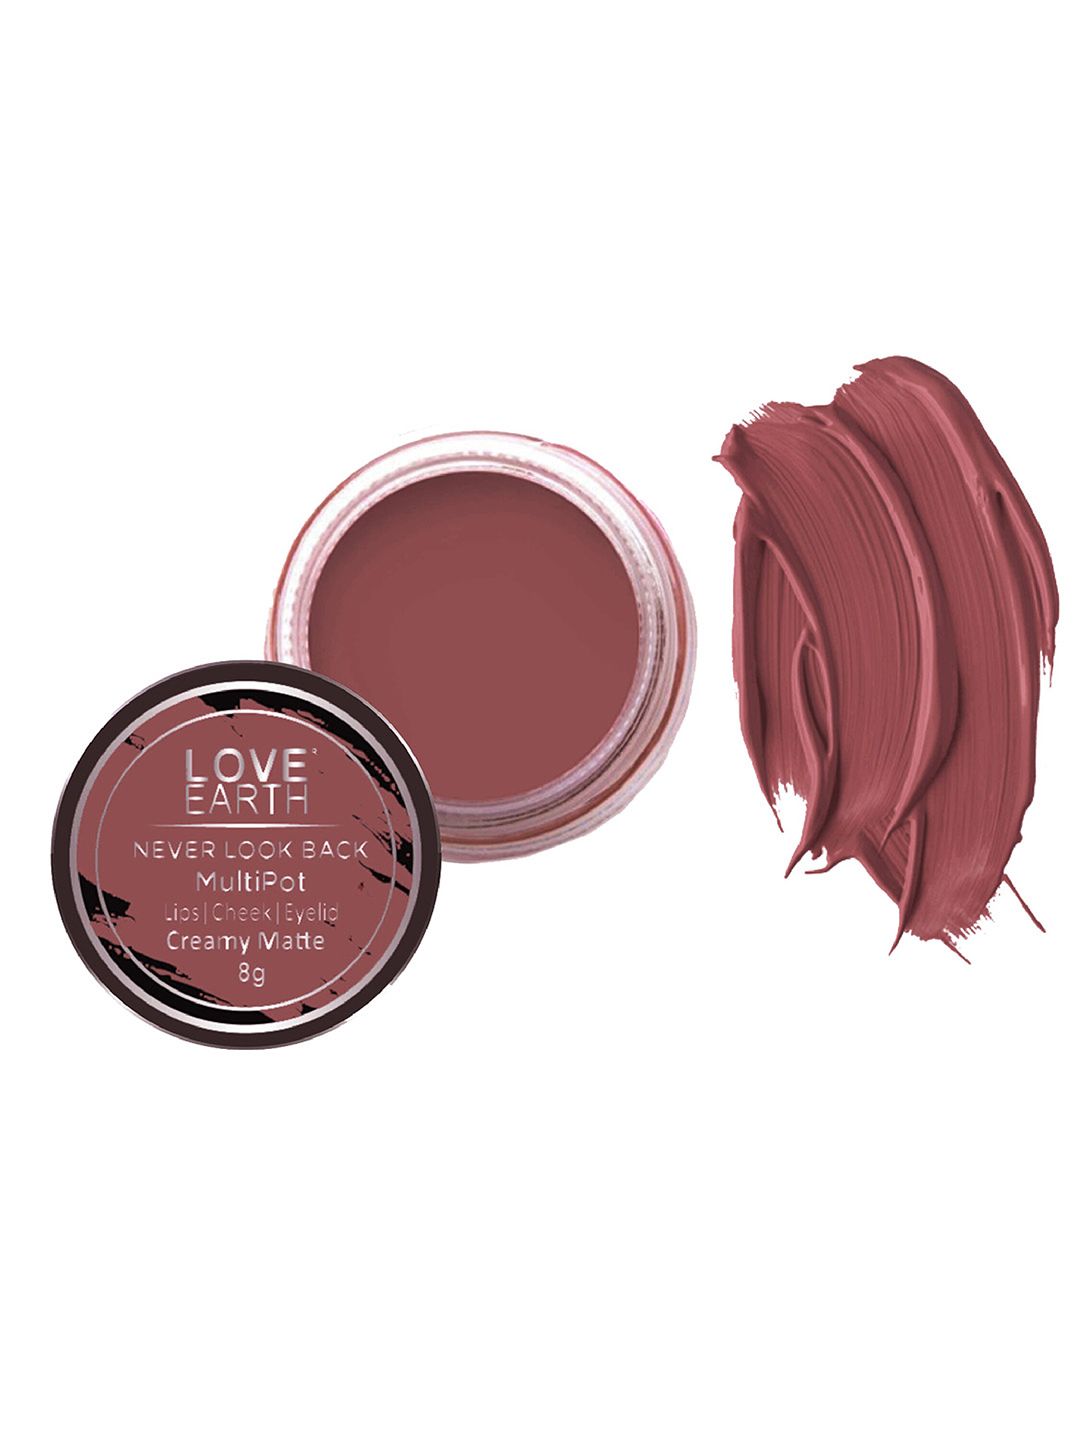 LOVE EARTH Multipot Creamy Matte Lip-Cheek-Eyelid Tint - Never Look Back Price in India